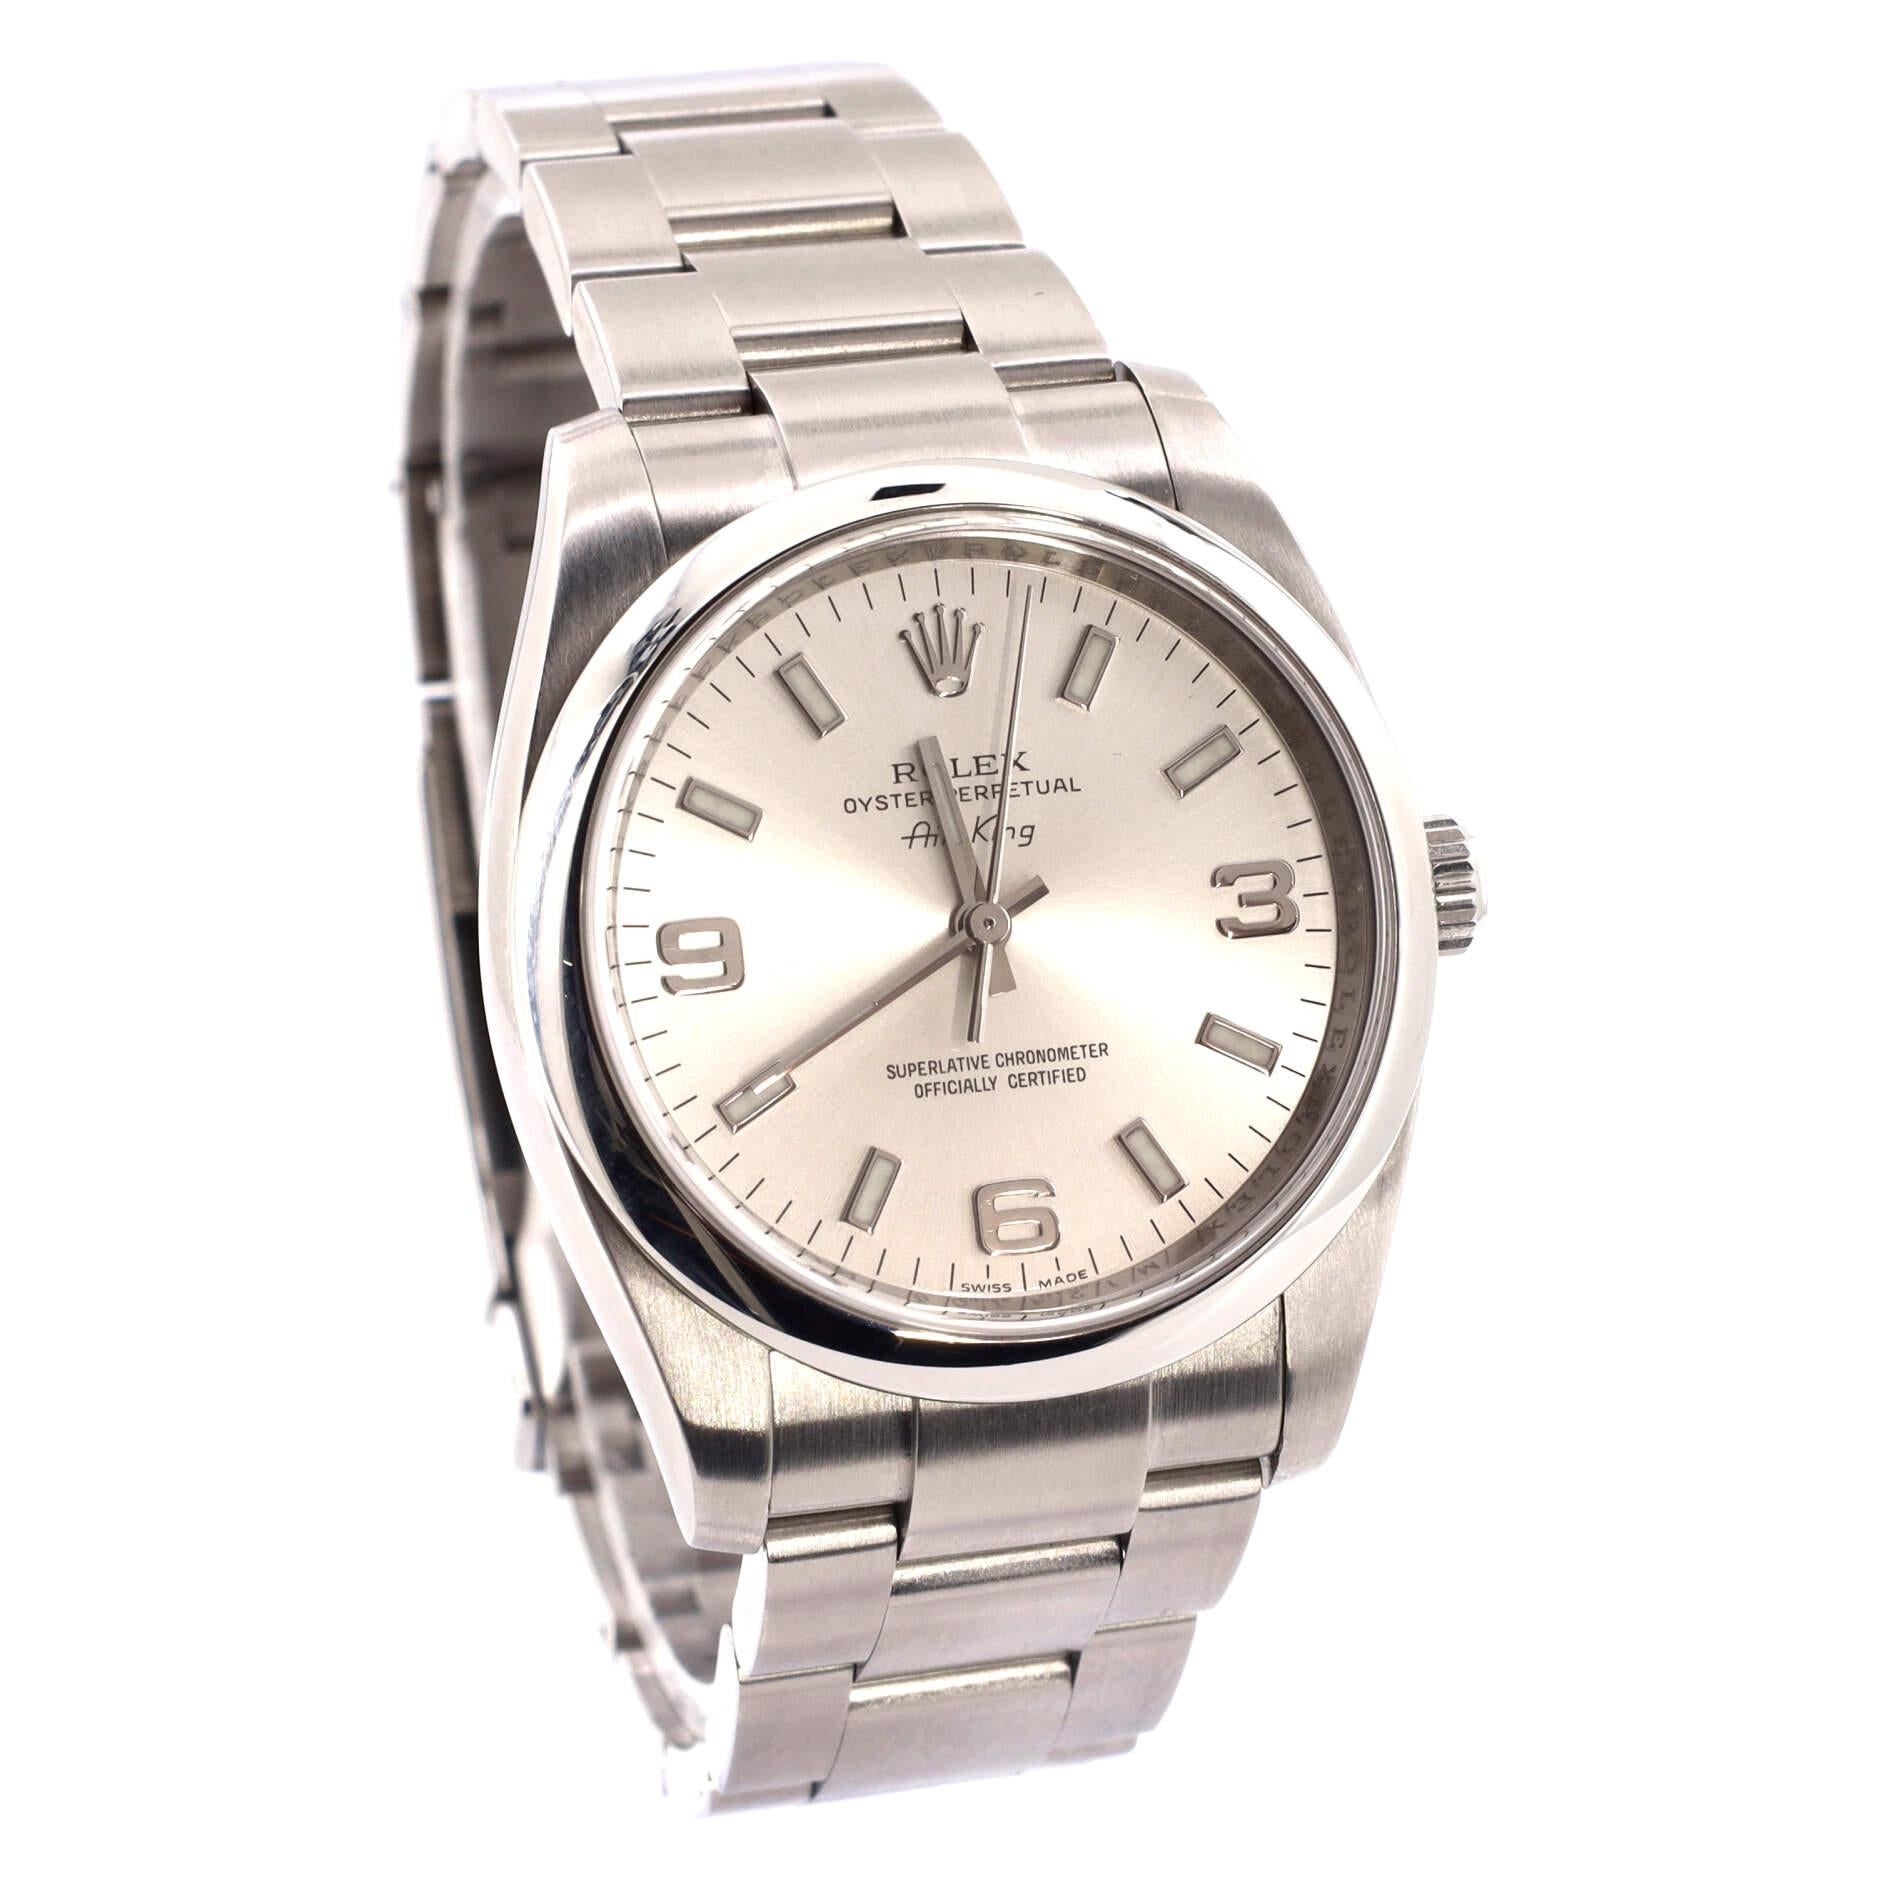 Condition: Great. Minor wear throughout case and bracelet.
Accessories: No Accessories
Measurements: Case Size/Width: 34mm, Watch Height: 12mm, Band Width: 19mm, Wrist circumference: 6.25